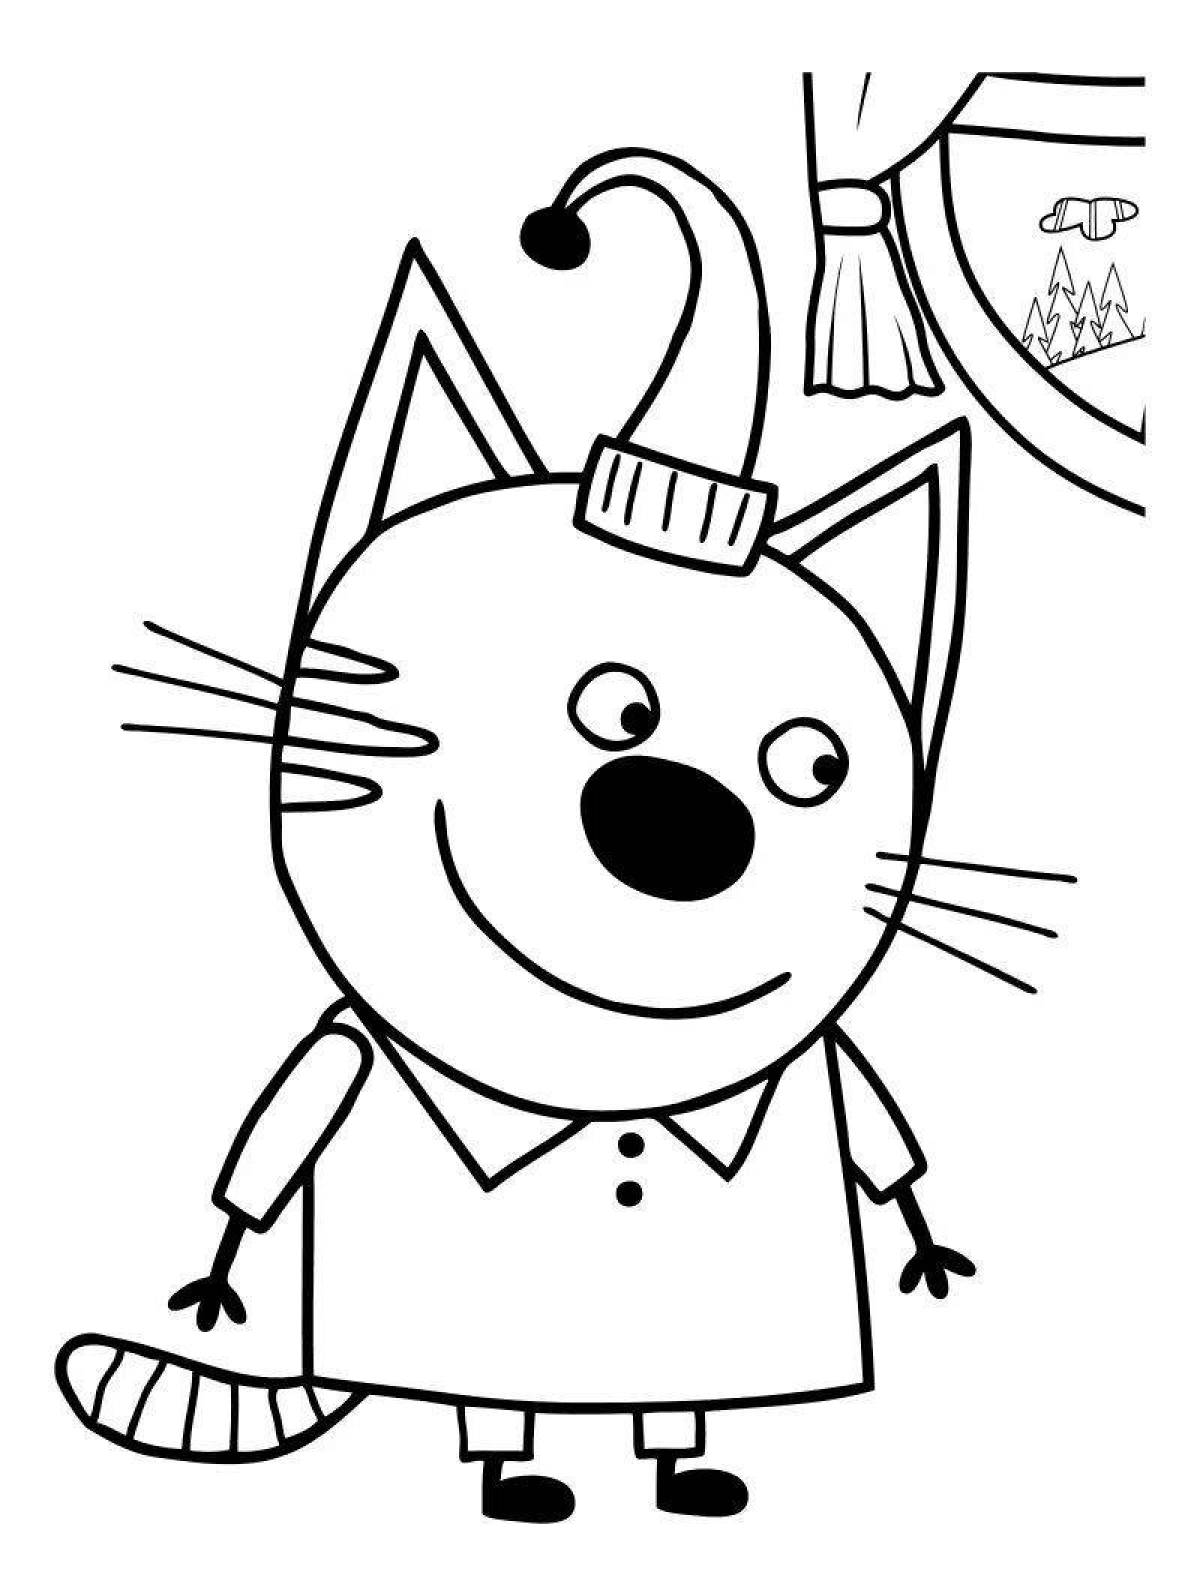 Three cats playful coloring book for kids